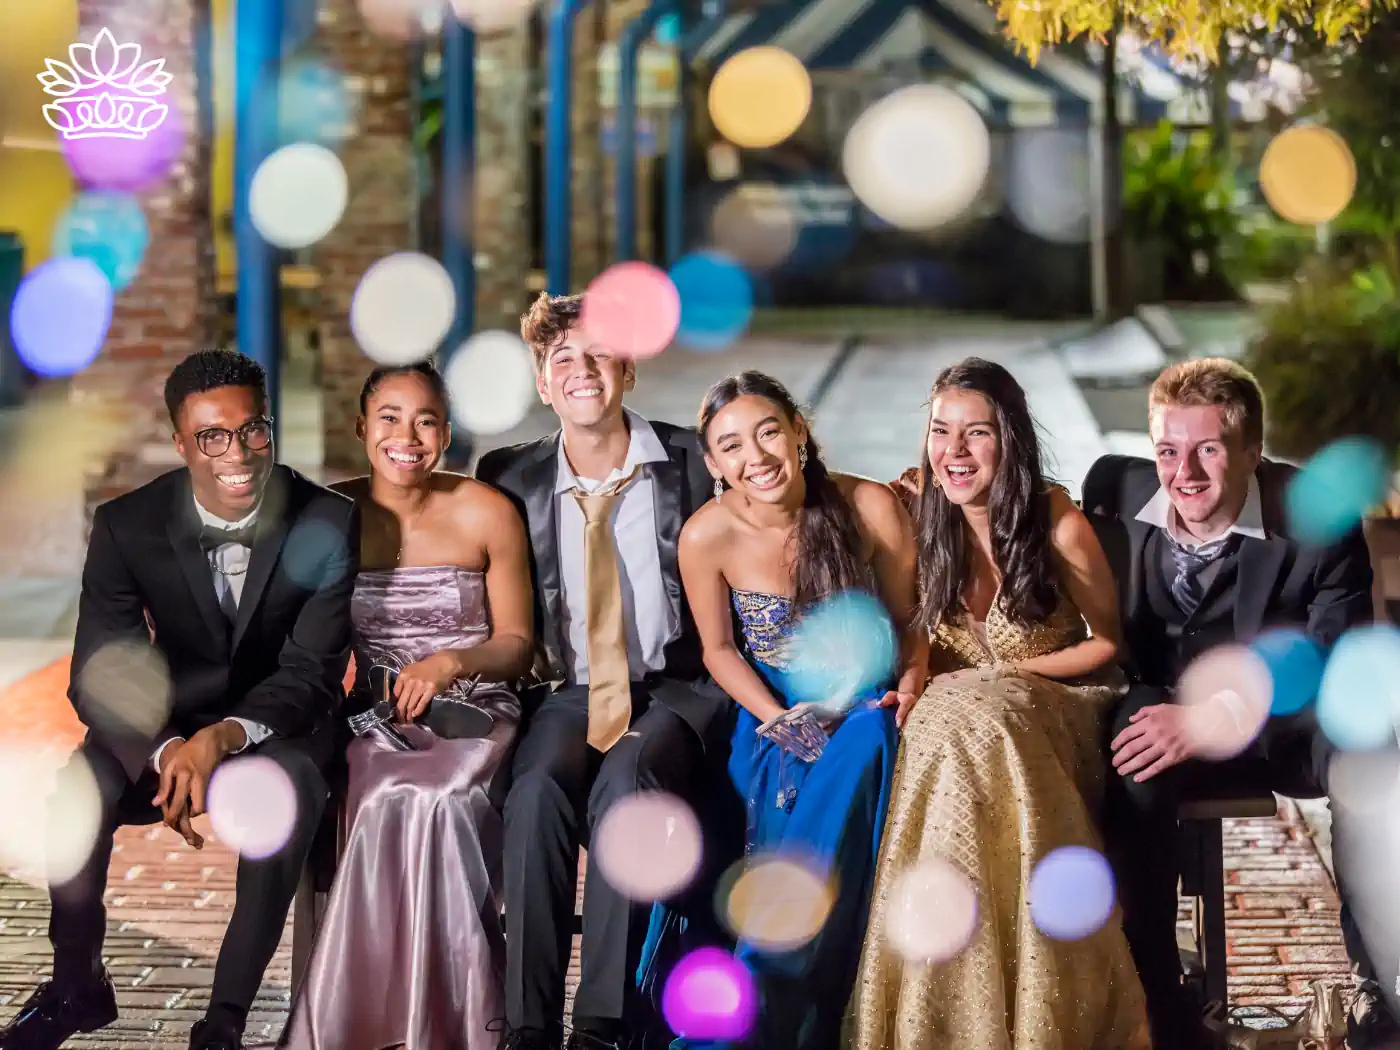 A group of five joyful teenagers dressed in formal attire, laughing and enjoying their matric dance evening outdoors. The scene is beautifully illuminated by colorful bokeh lights, creating a festive and magical atmosphere. Fabulous Flowers and Gifts - Matric Dance. Delivered with Heart.